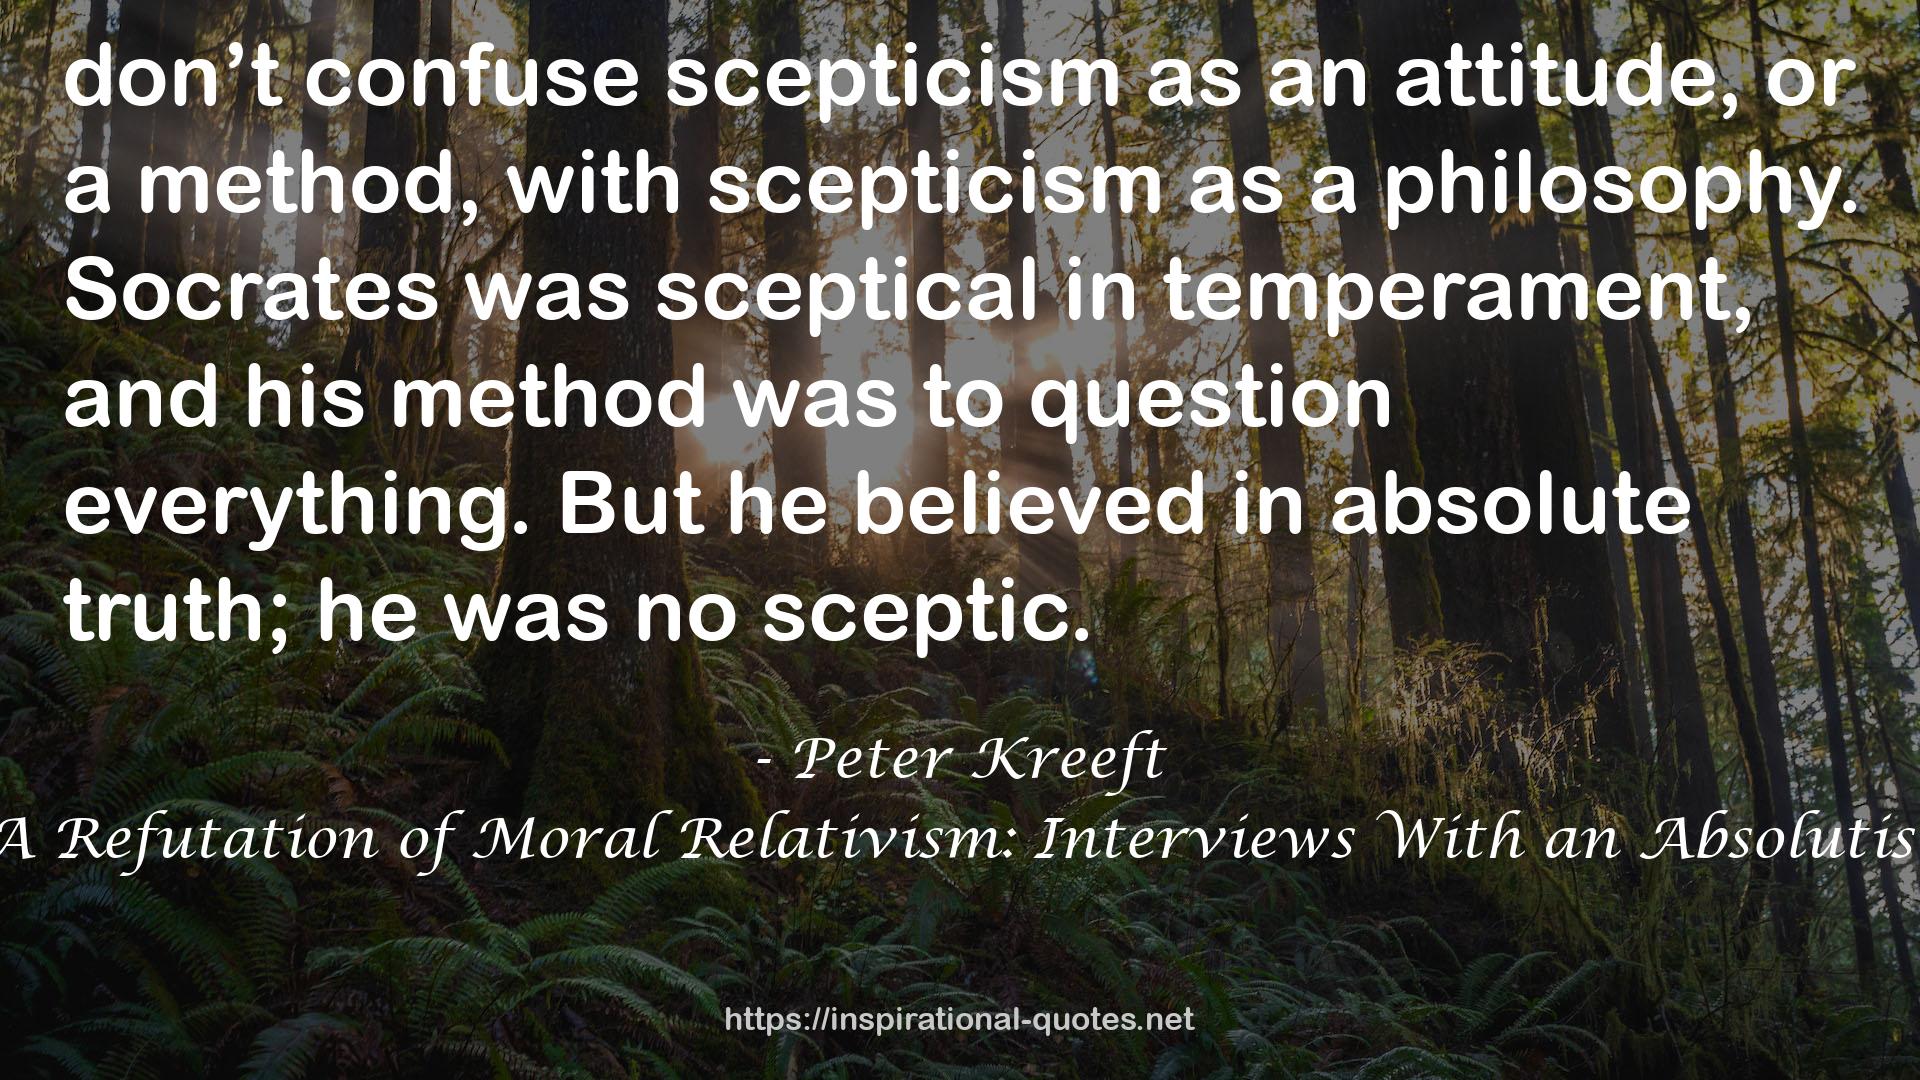 A Refutation of Moral Relativism: Interviews With an Absolutist QUOTES